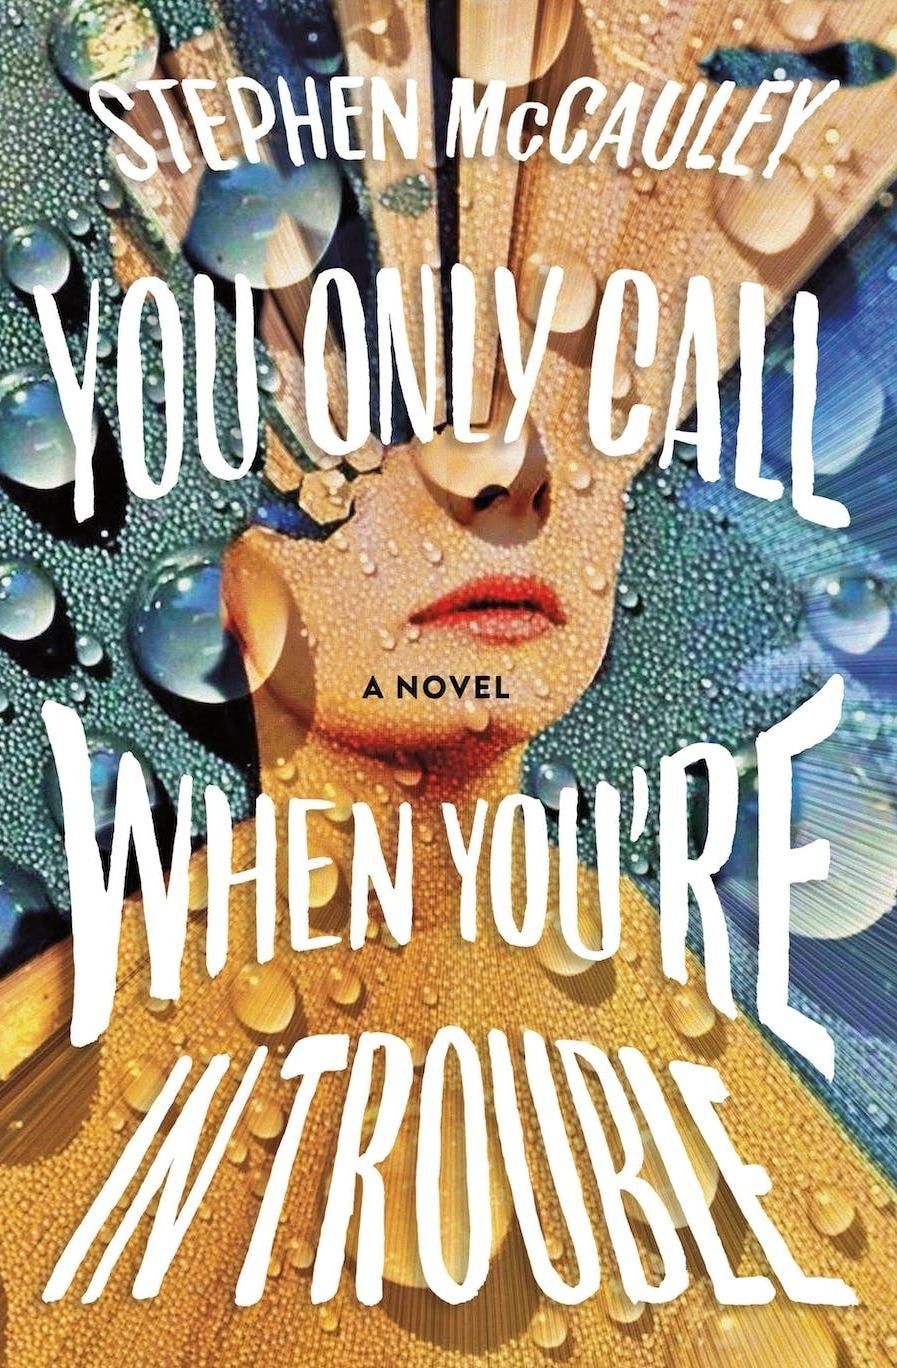 You Only Call When You're in Trouble, by Stephen McCauley